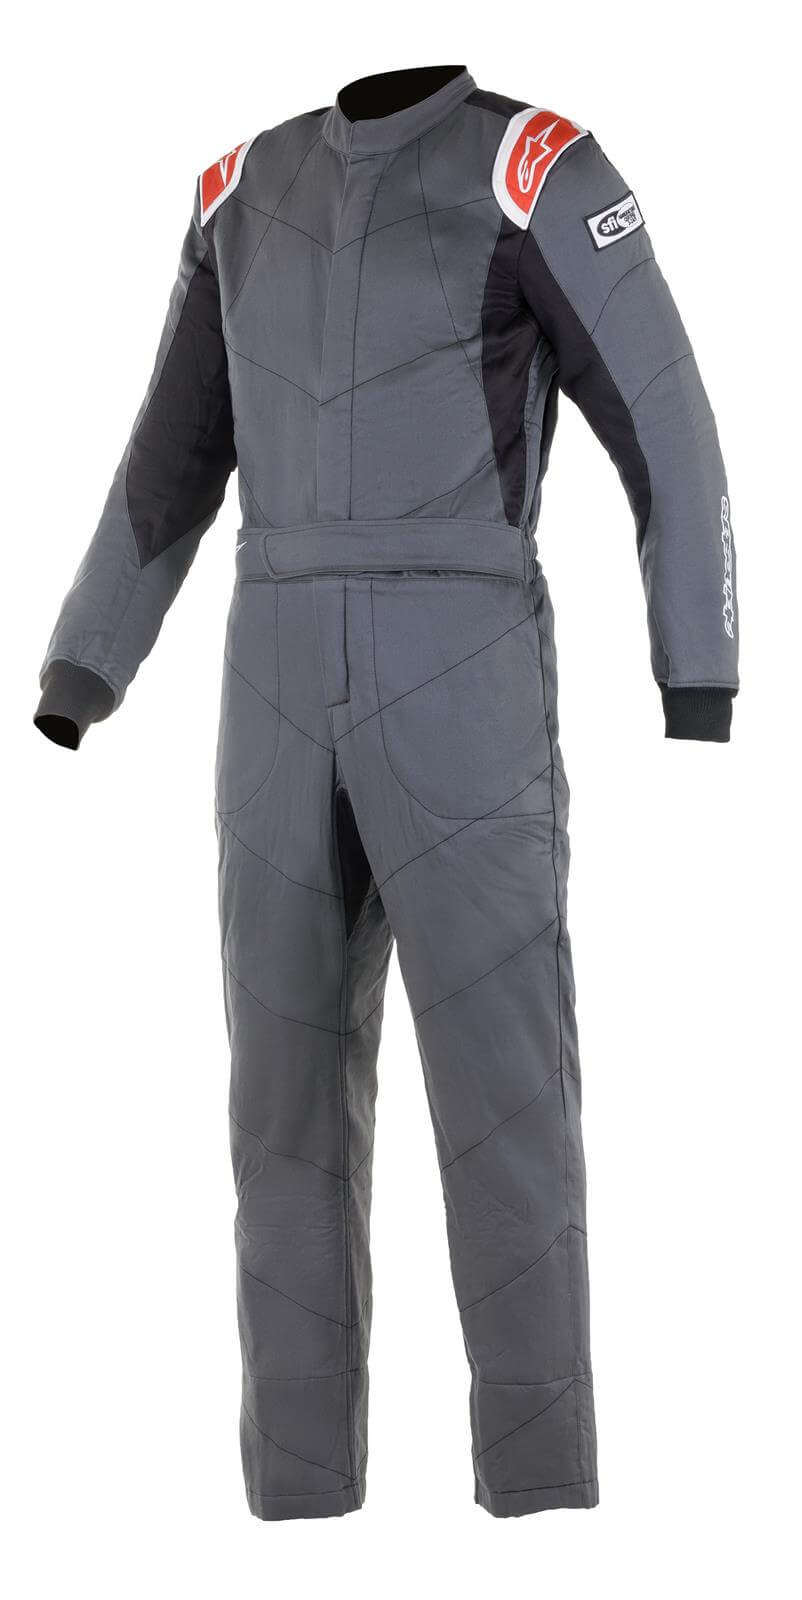 Knoxville V2 Suit - $449.95